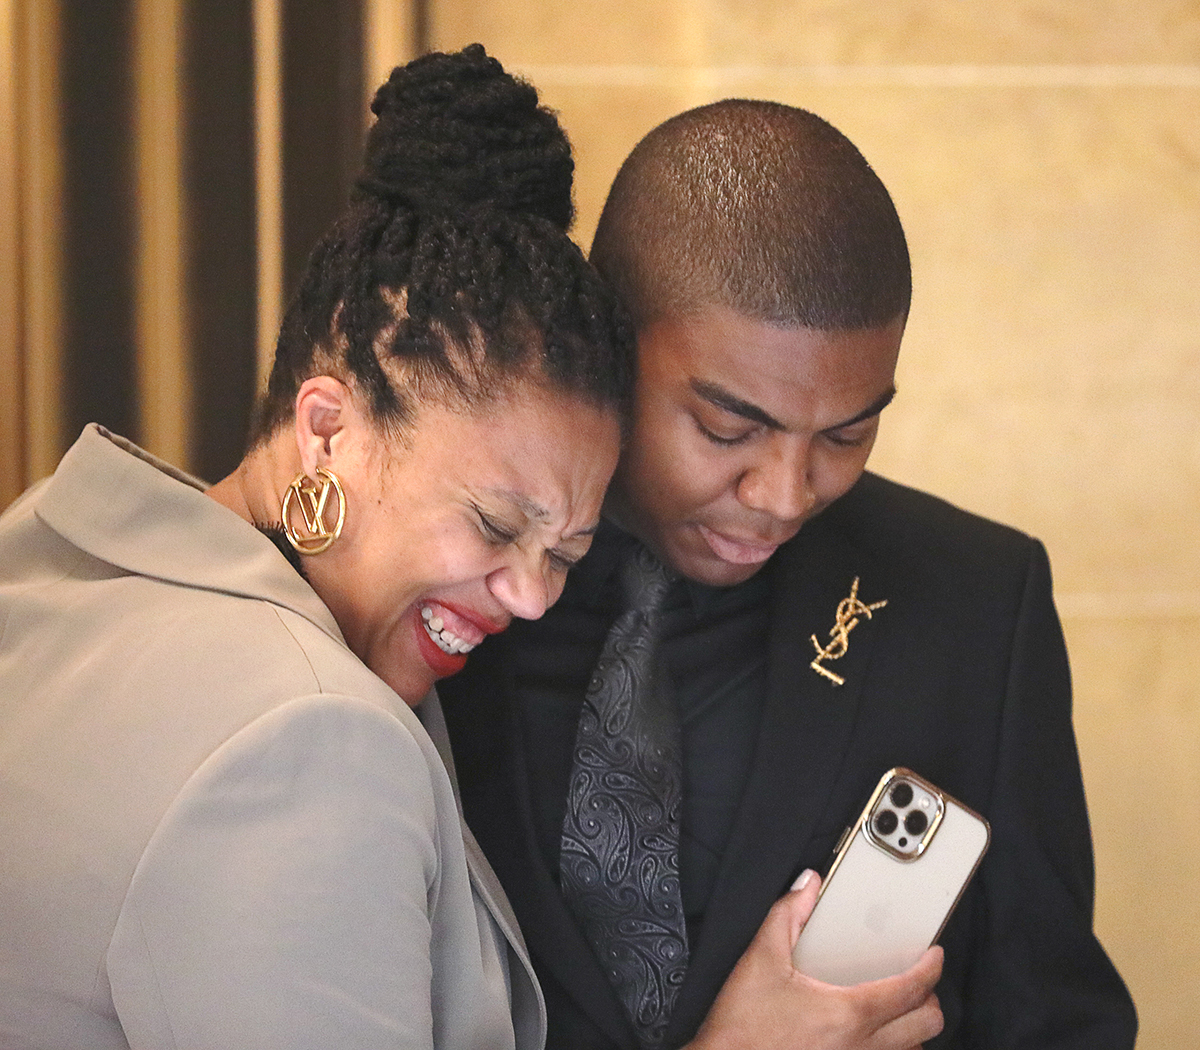 Keronten Ewings (right) with his mother, Takisha Ewings, share a hug